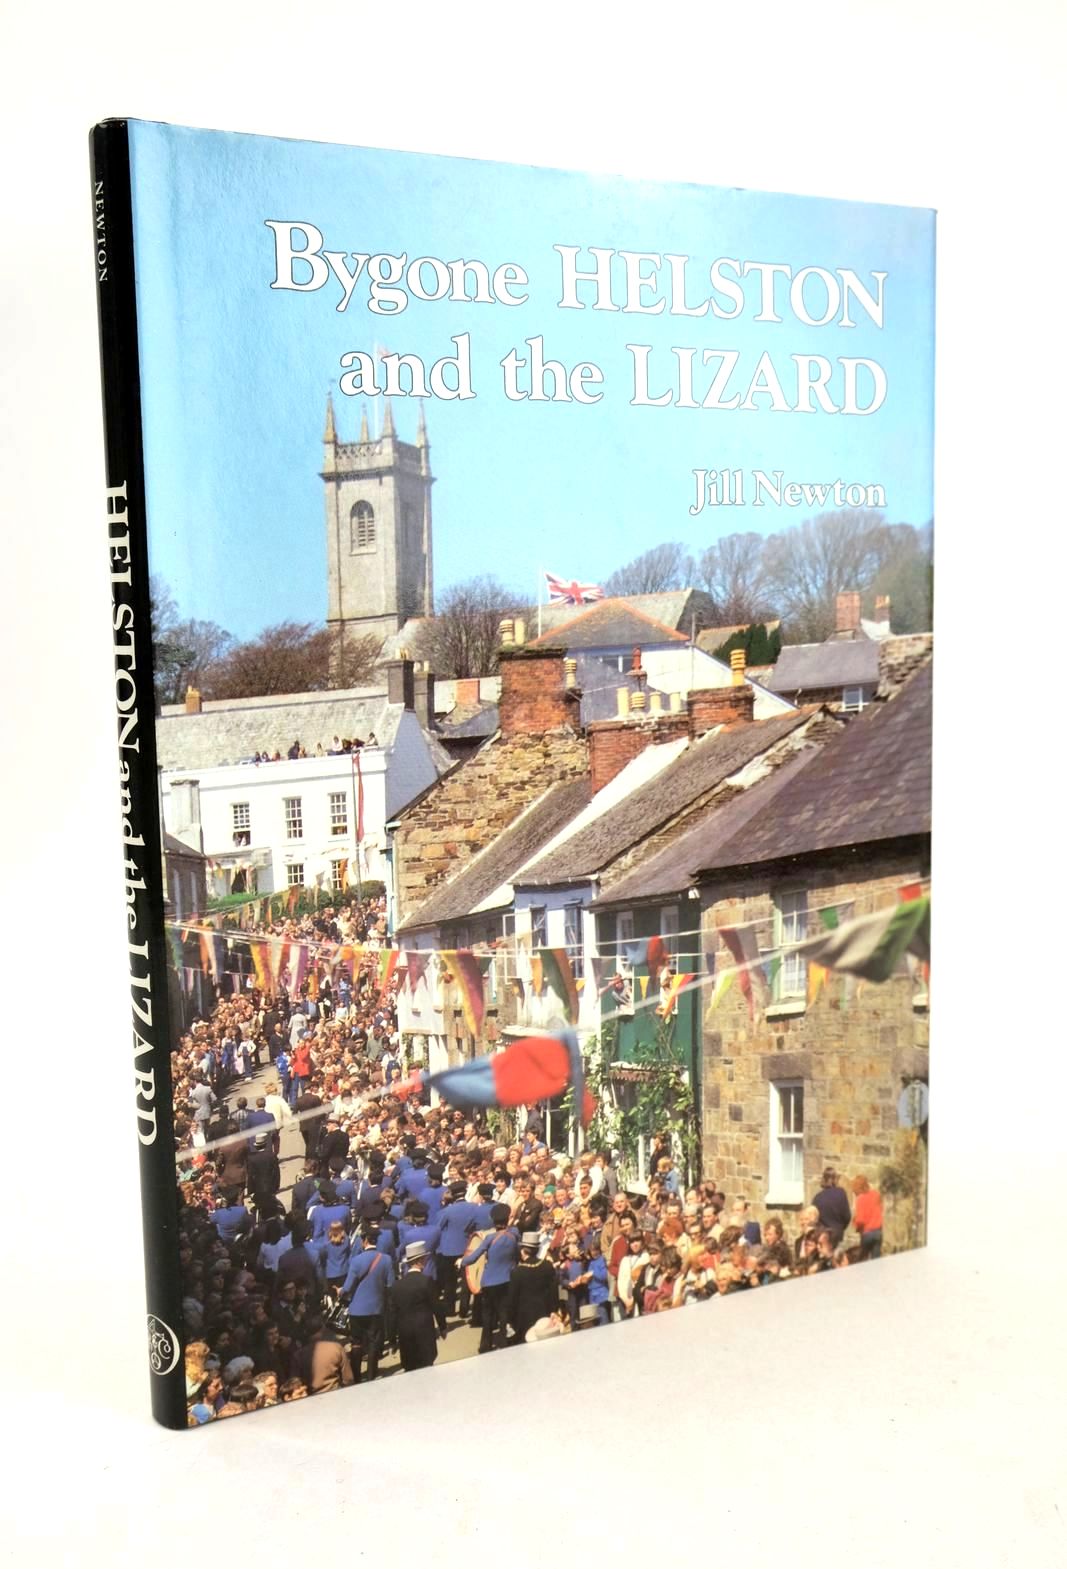 Photo of BYGONE HELSTON AND THE LIZARD written by Newton, Jill published by Phillimore (STOCK CODE: 1326507)  for sale by Stella & Rose's Books